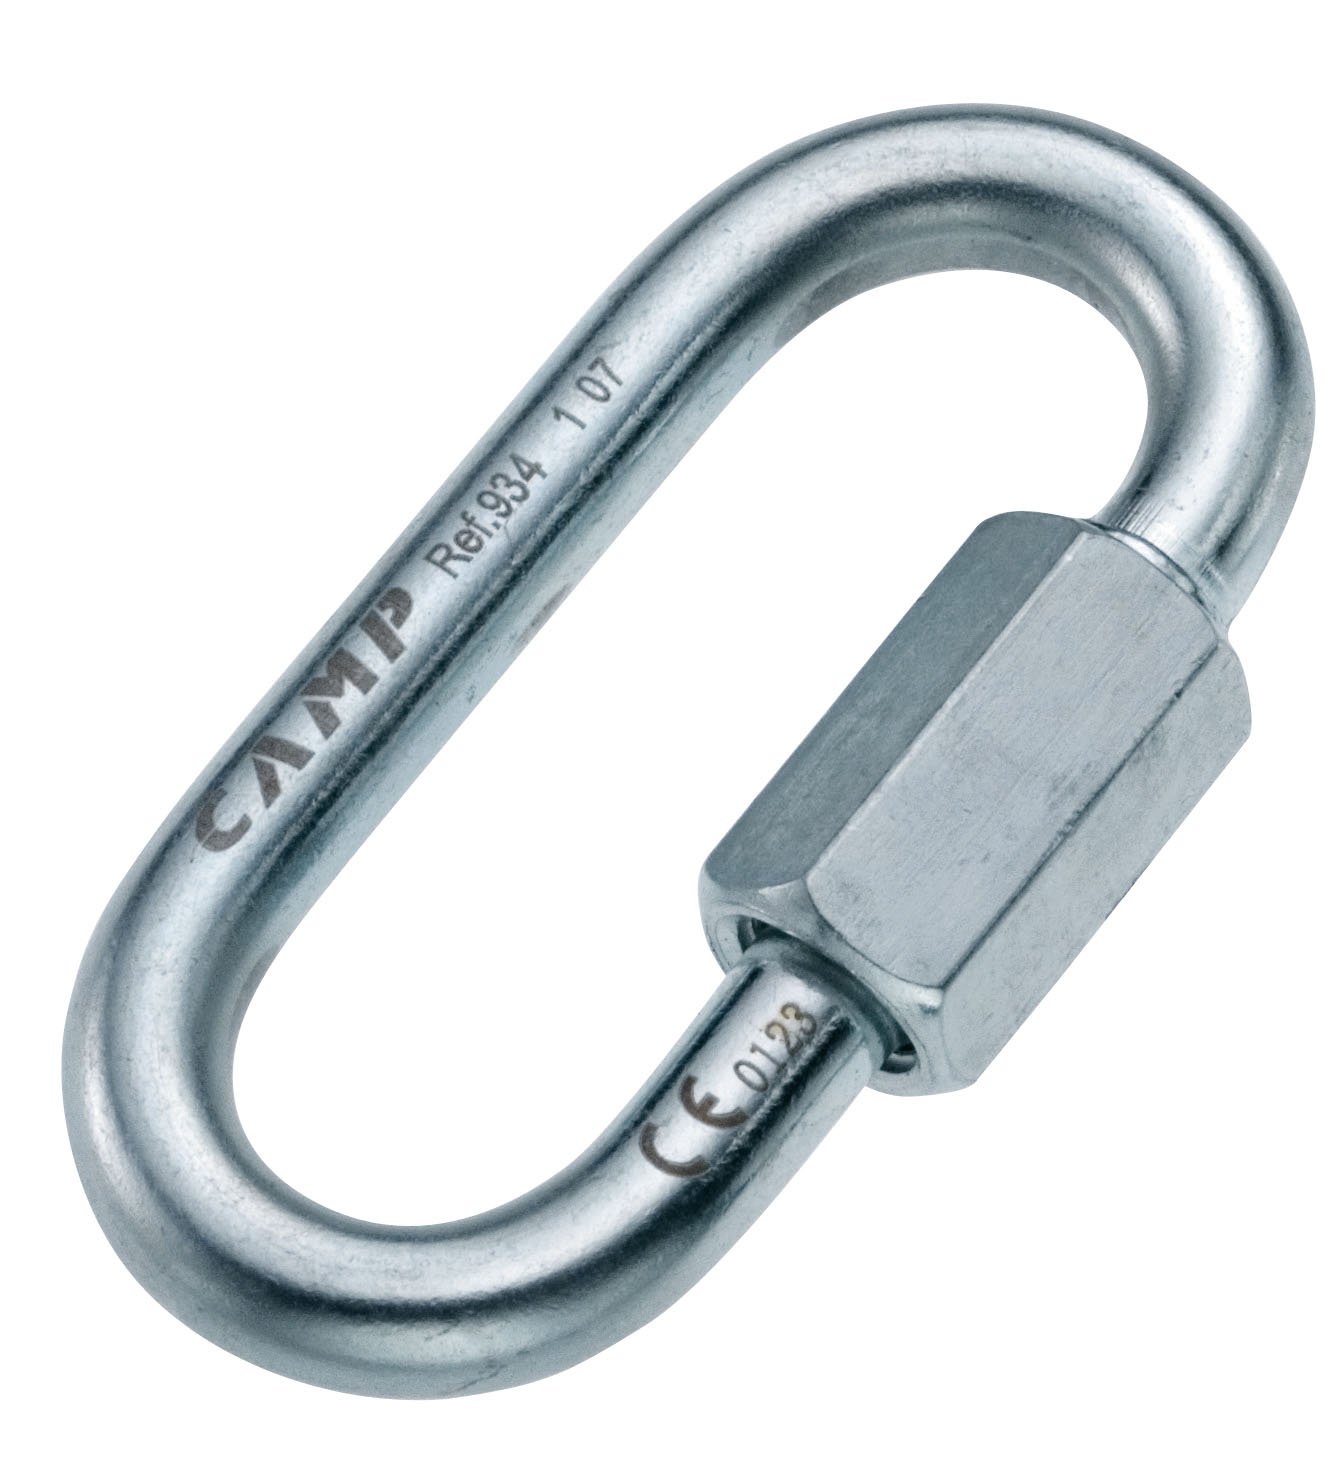 Camp Oval Quick Link 8mm